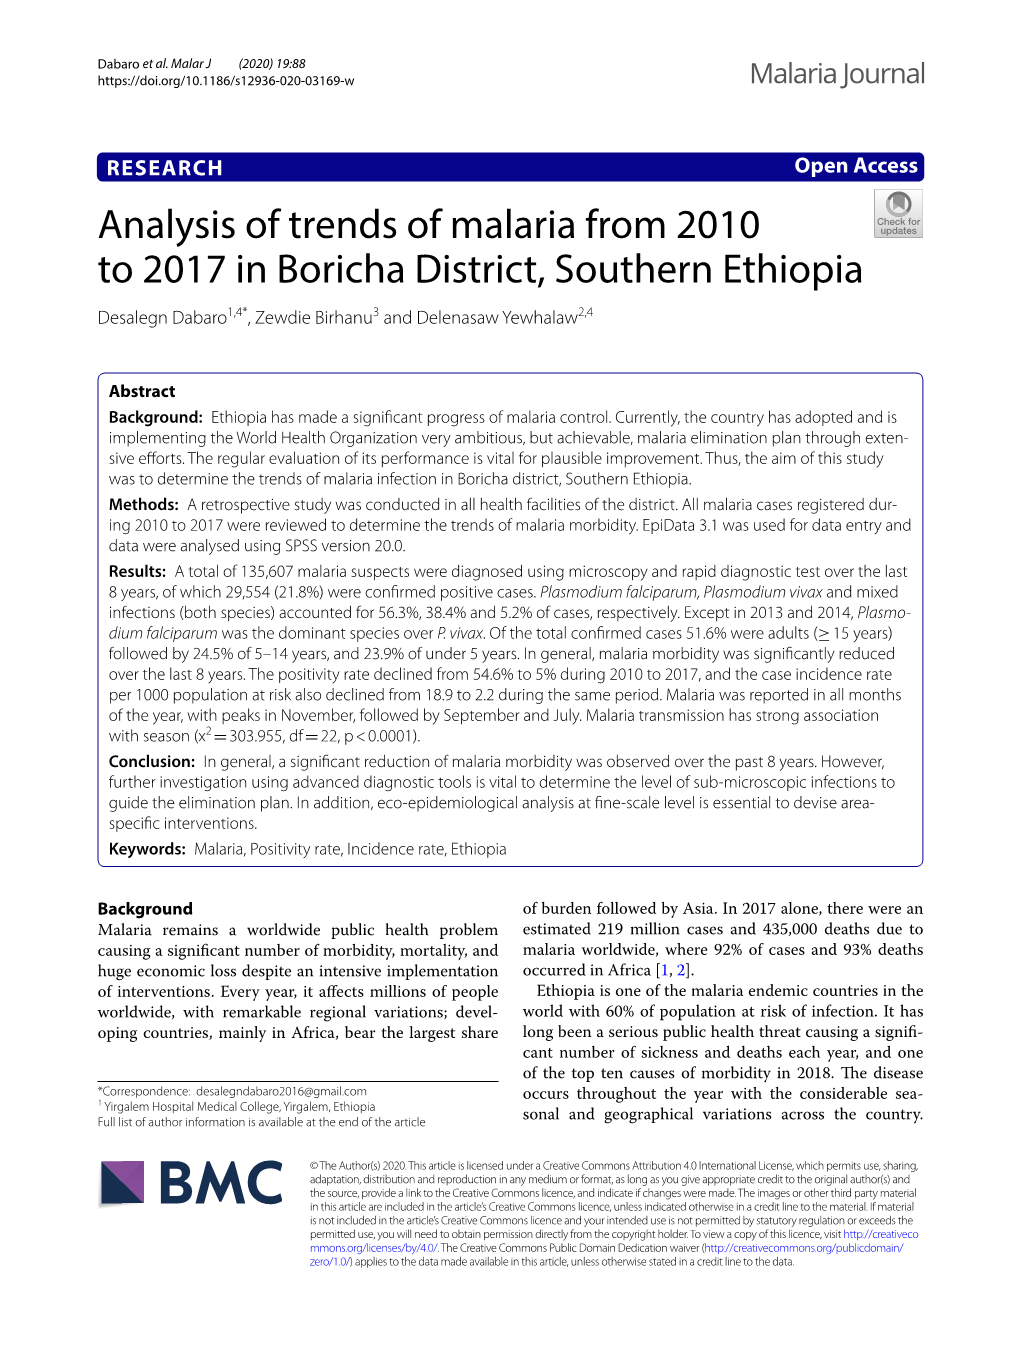 Analysis of Trends of Malaria from 2010 to 2017 in Boricha District, Southern Ethiopia Desalegn Dabaro1,4*, Zewdie Birhanu3 and Delenasaw Yewhalaw2,4